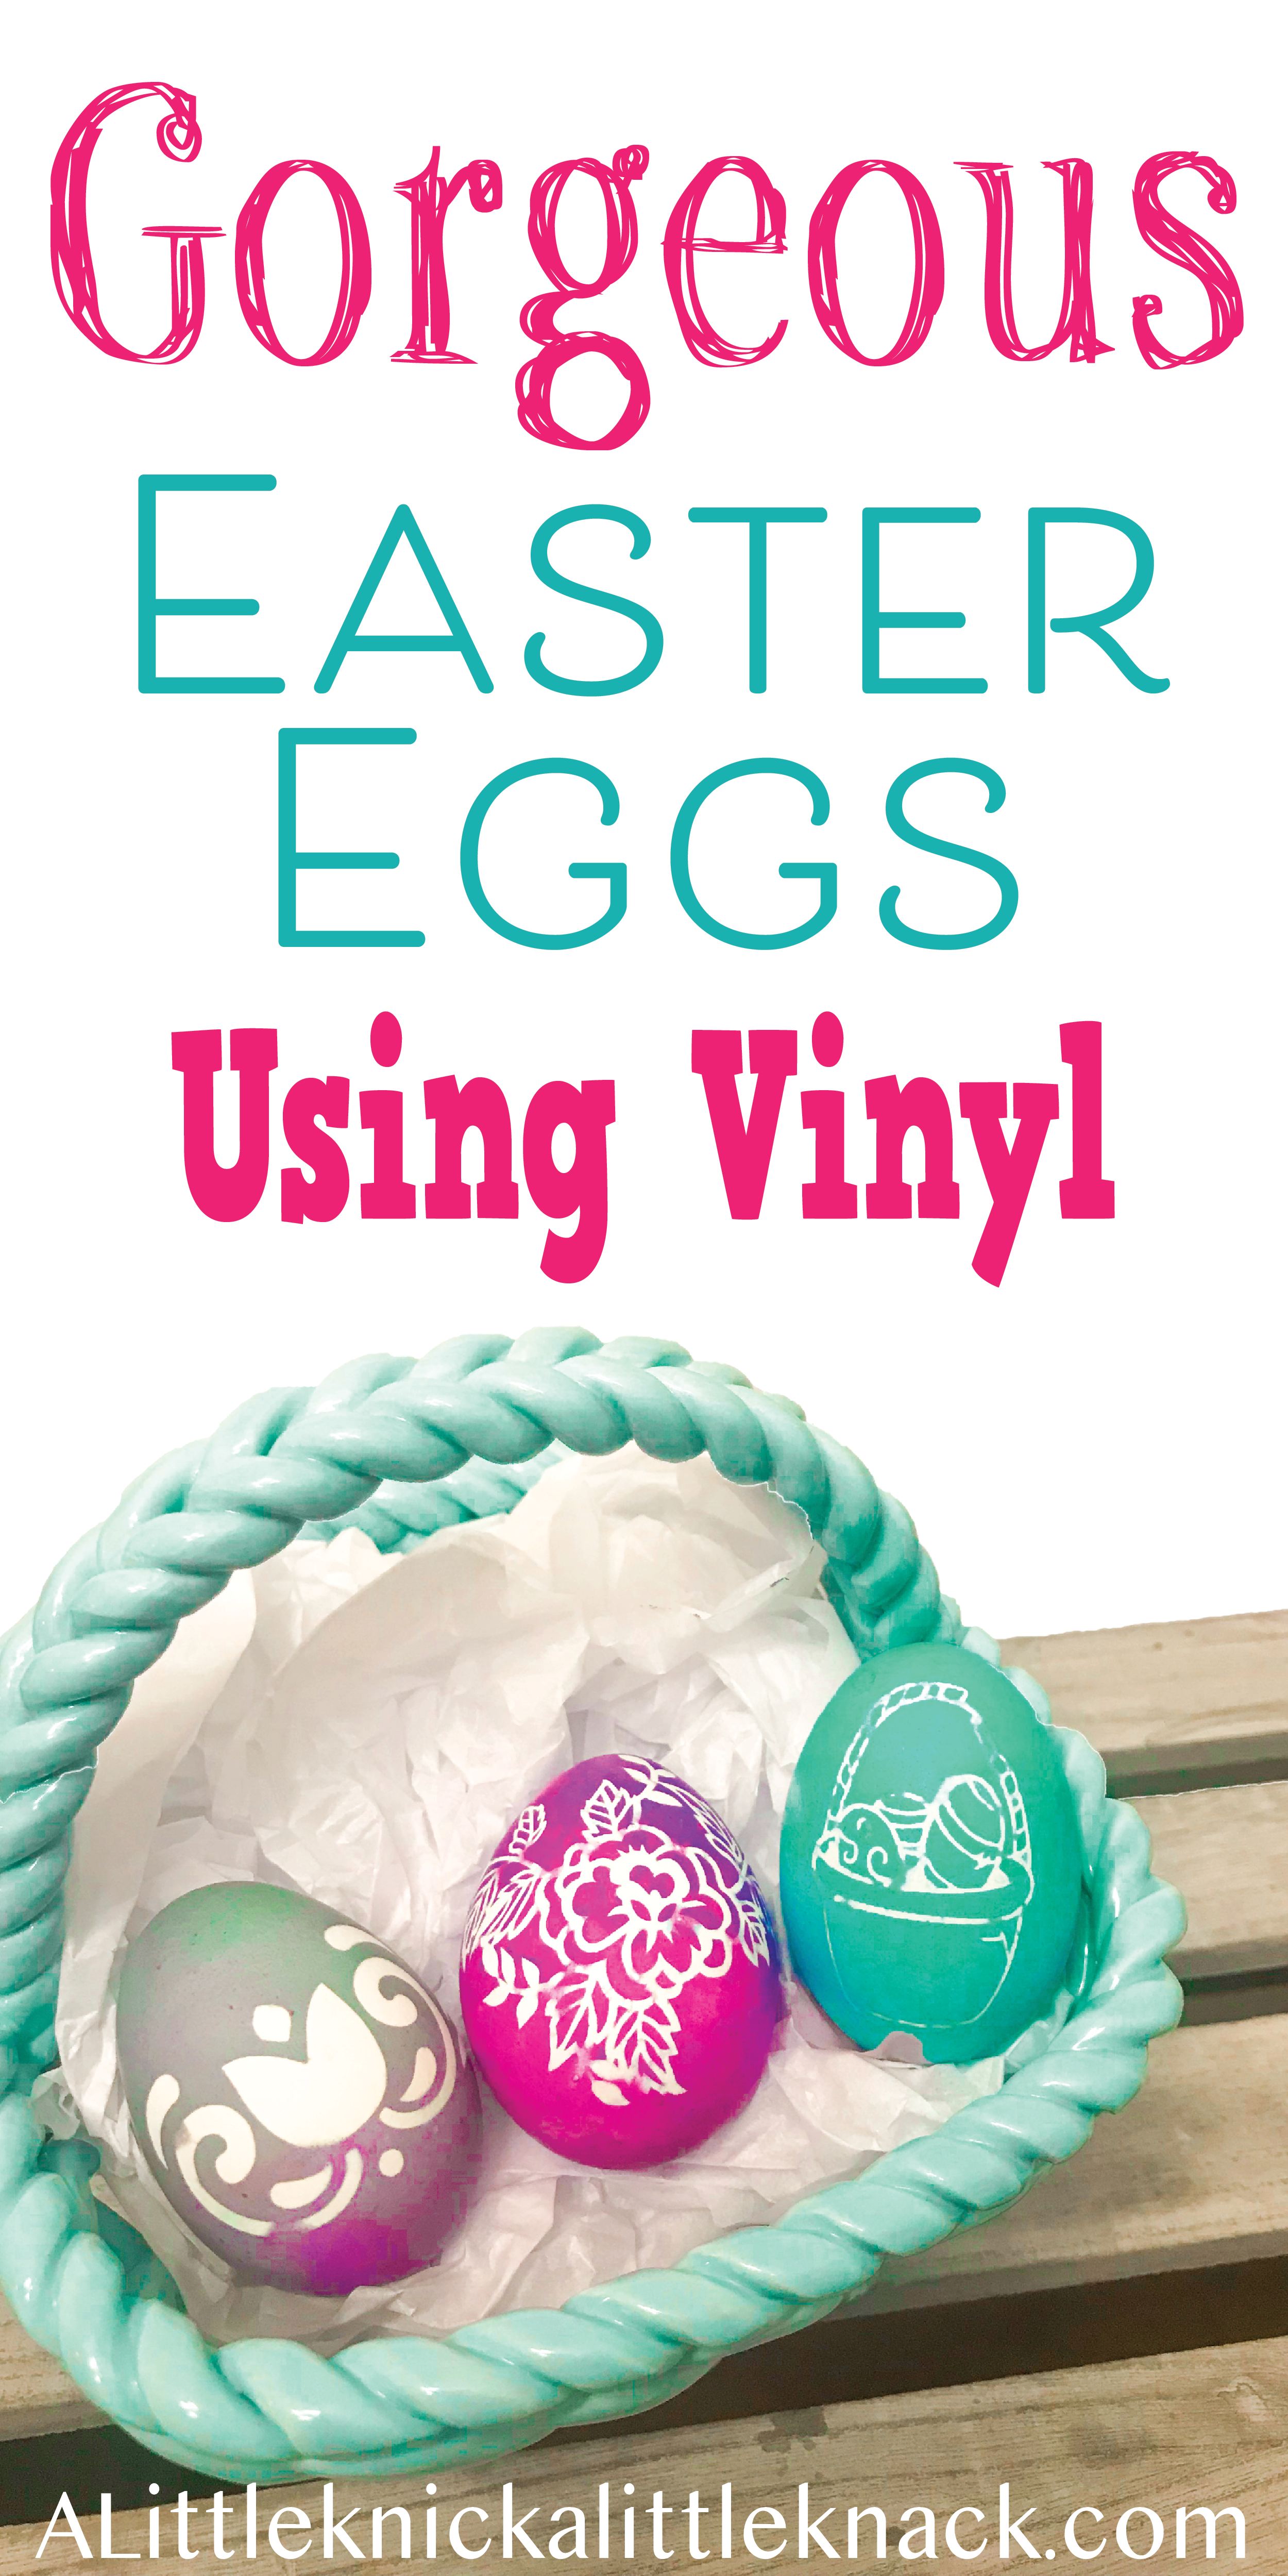 Vibrantly colored Easter eggs with white patterns in a teal basket, with a text overlay.